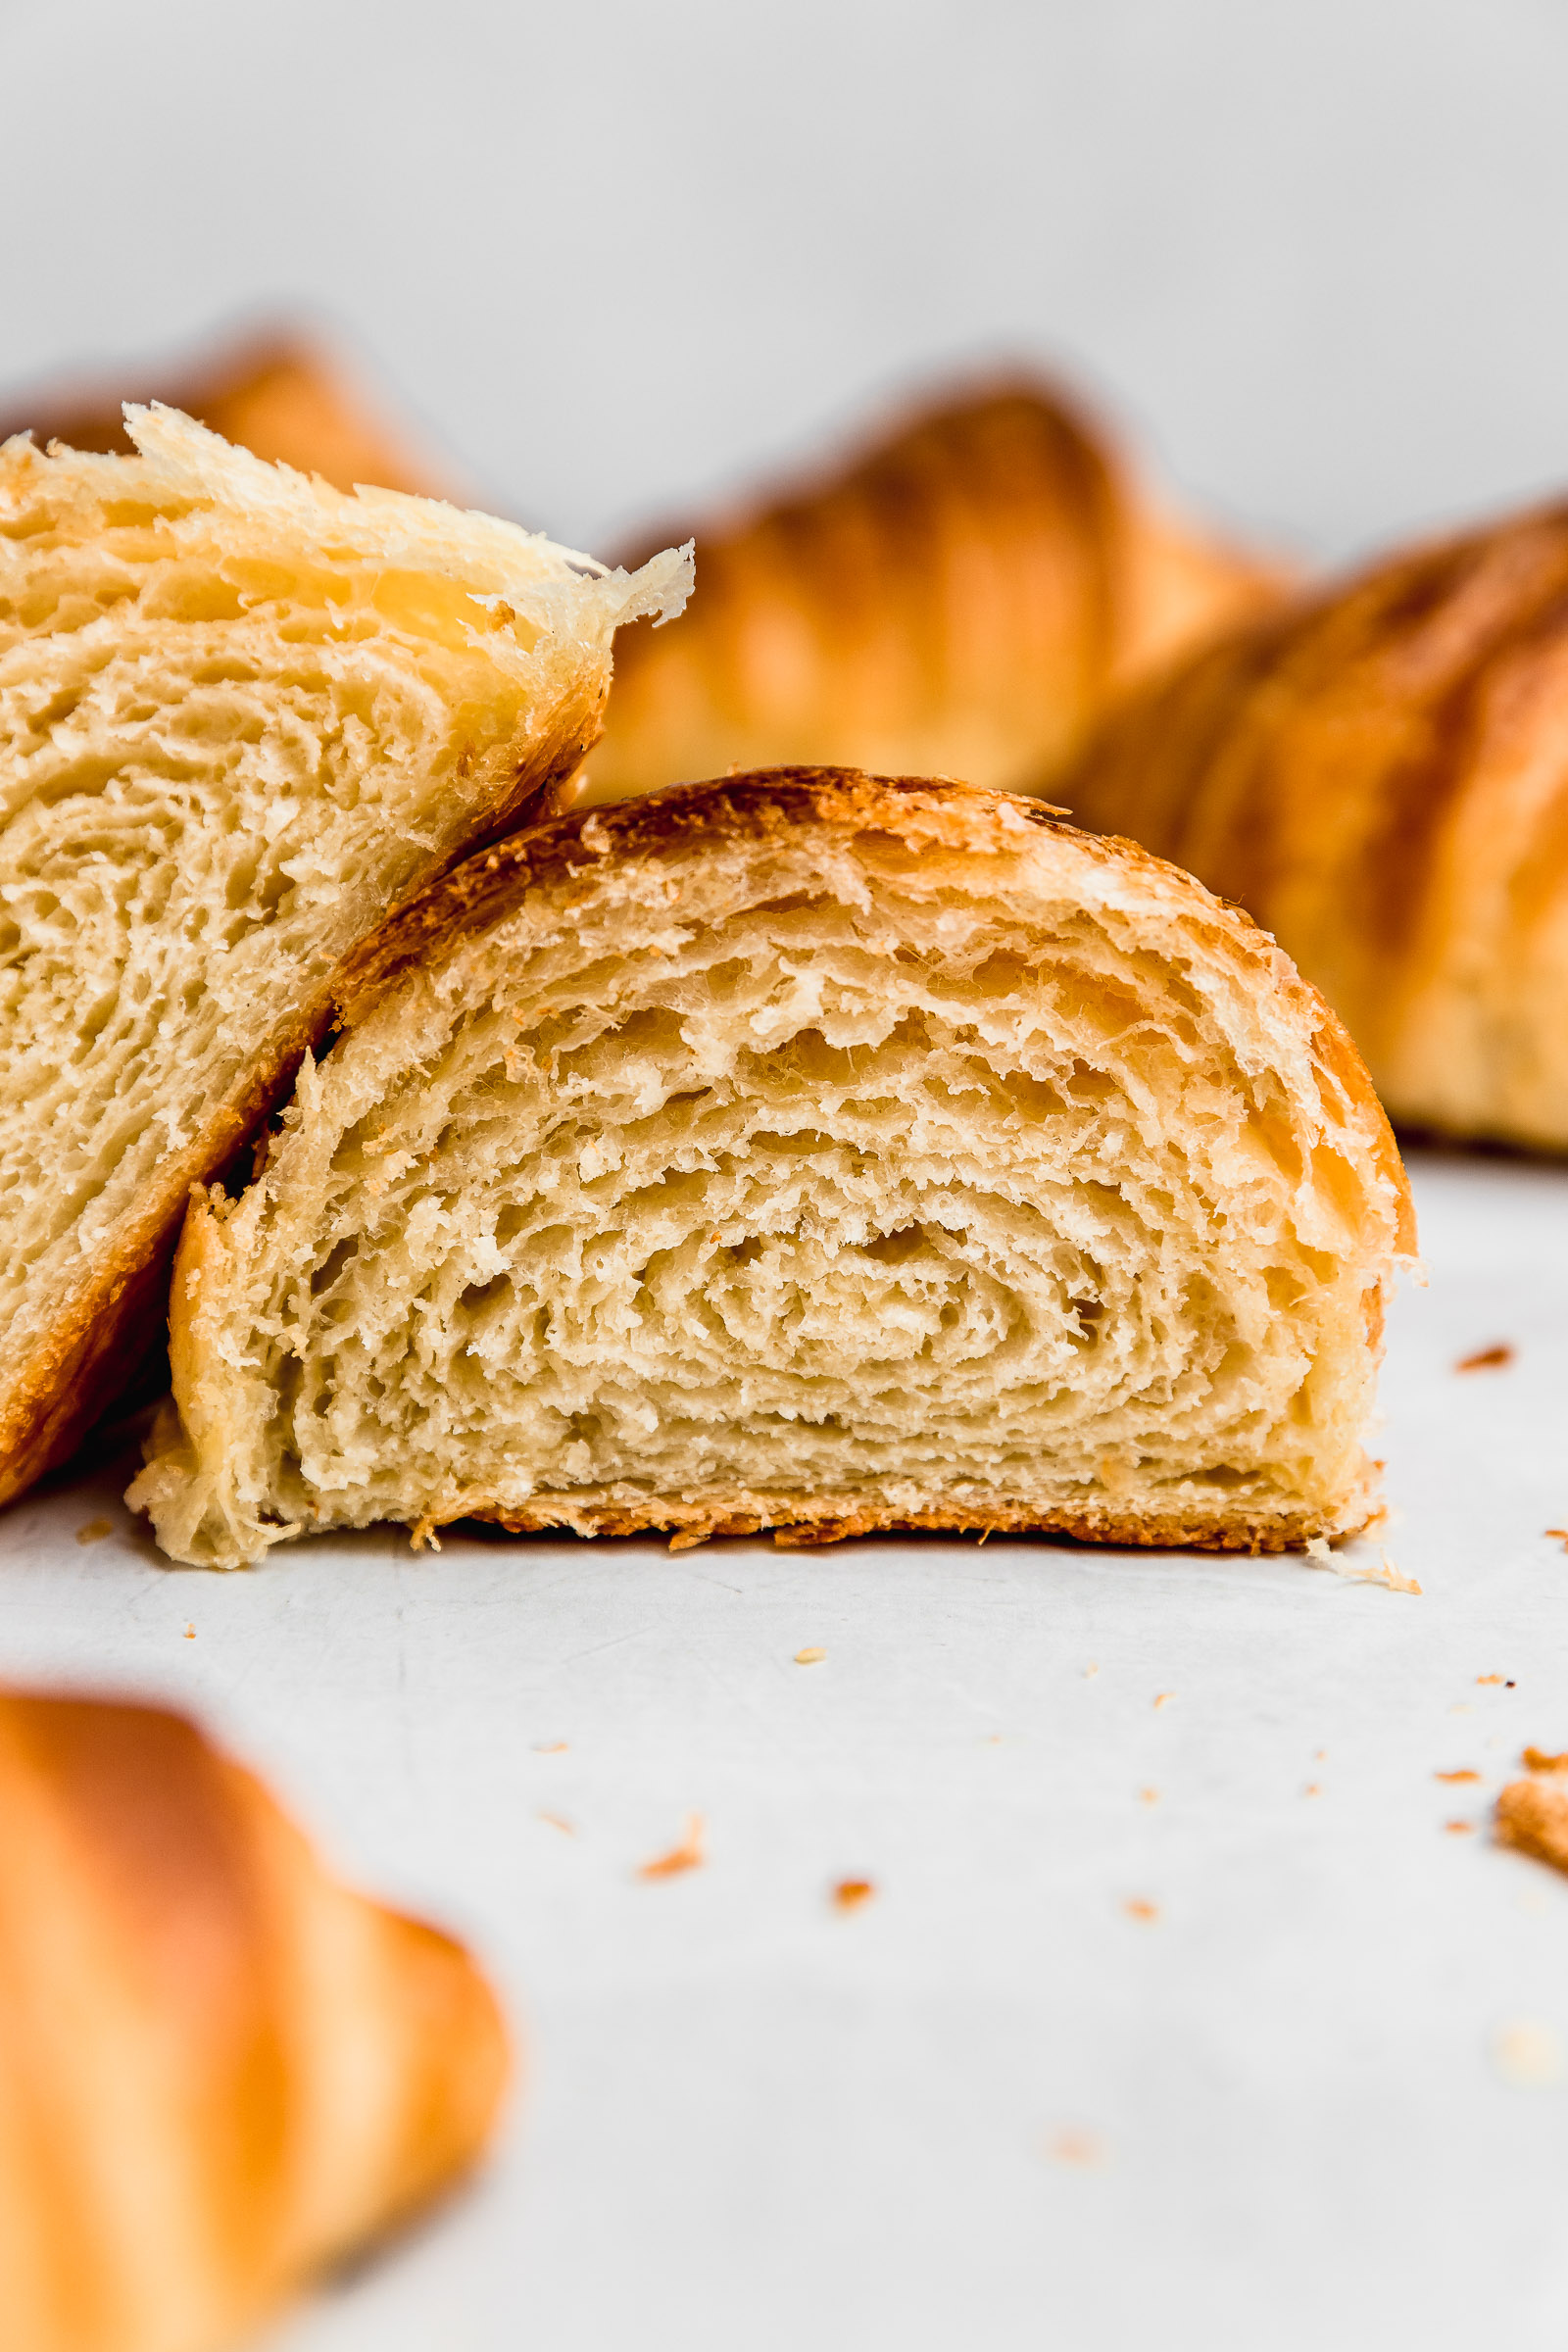 Cross section of a homemade buter croissant, with pockets and flaky layers of air and dough.